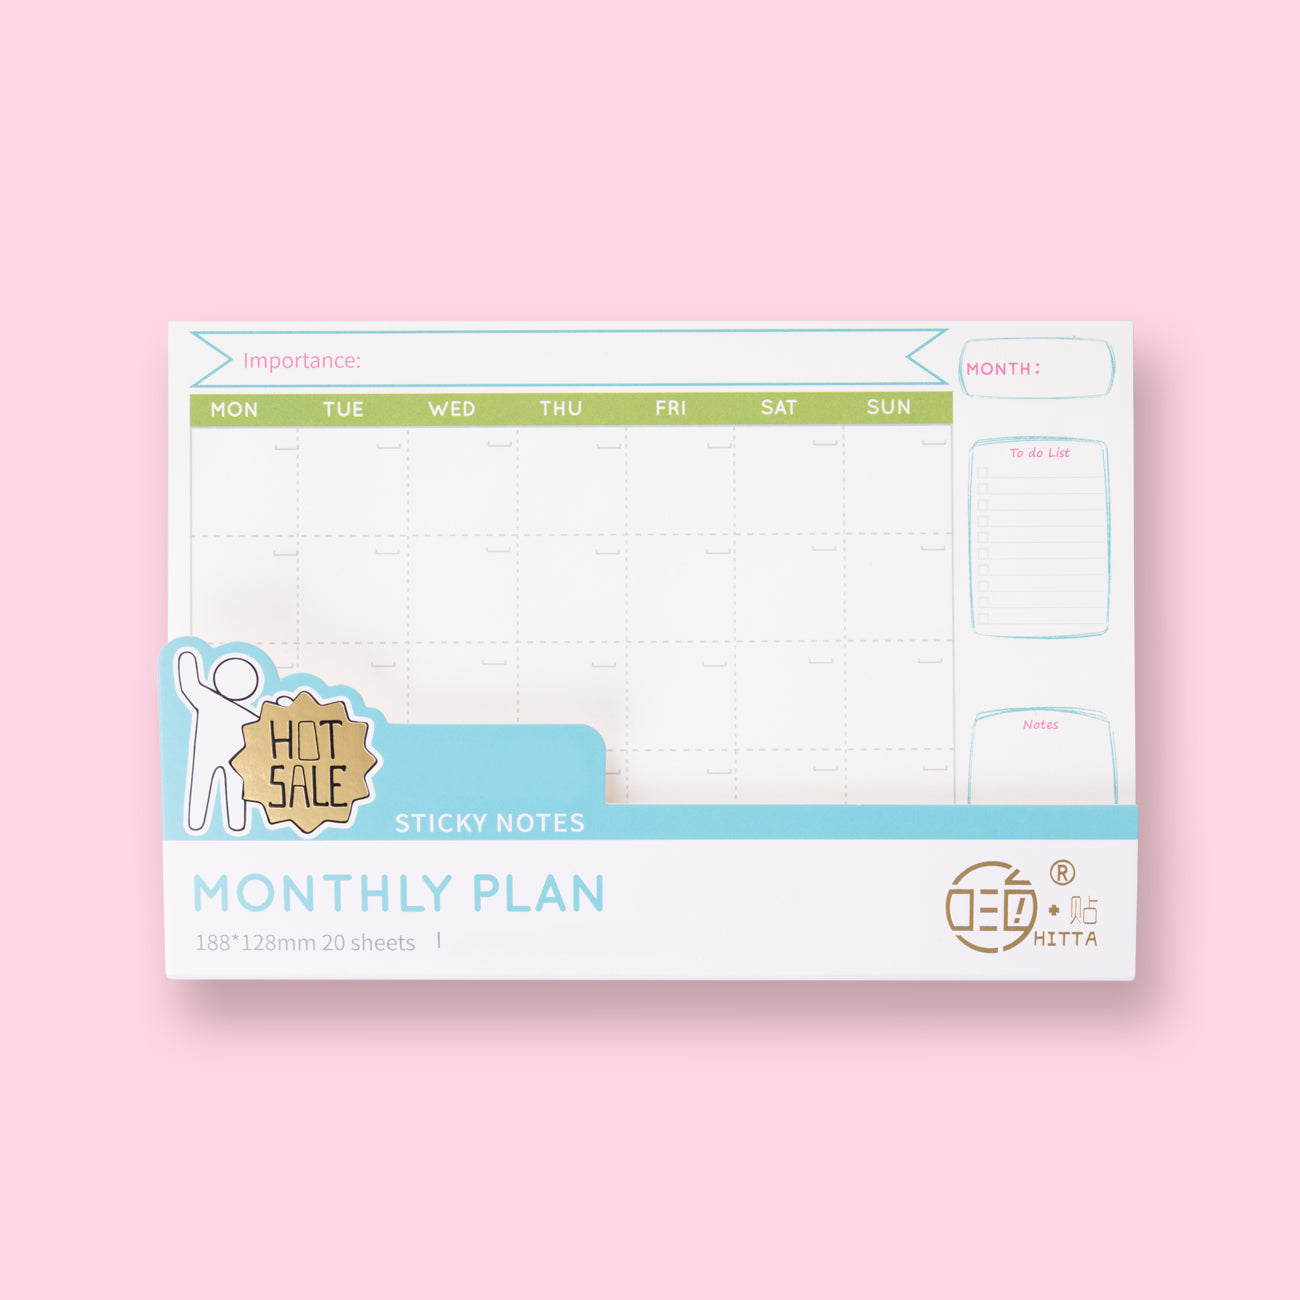 Monthly Plan Sticky Notes